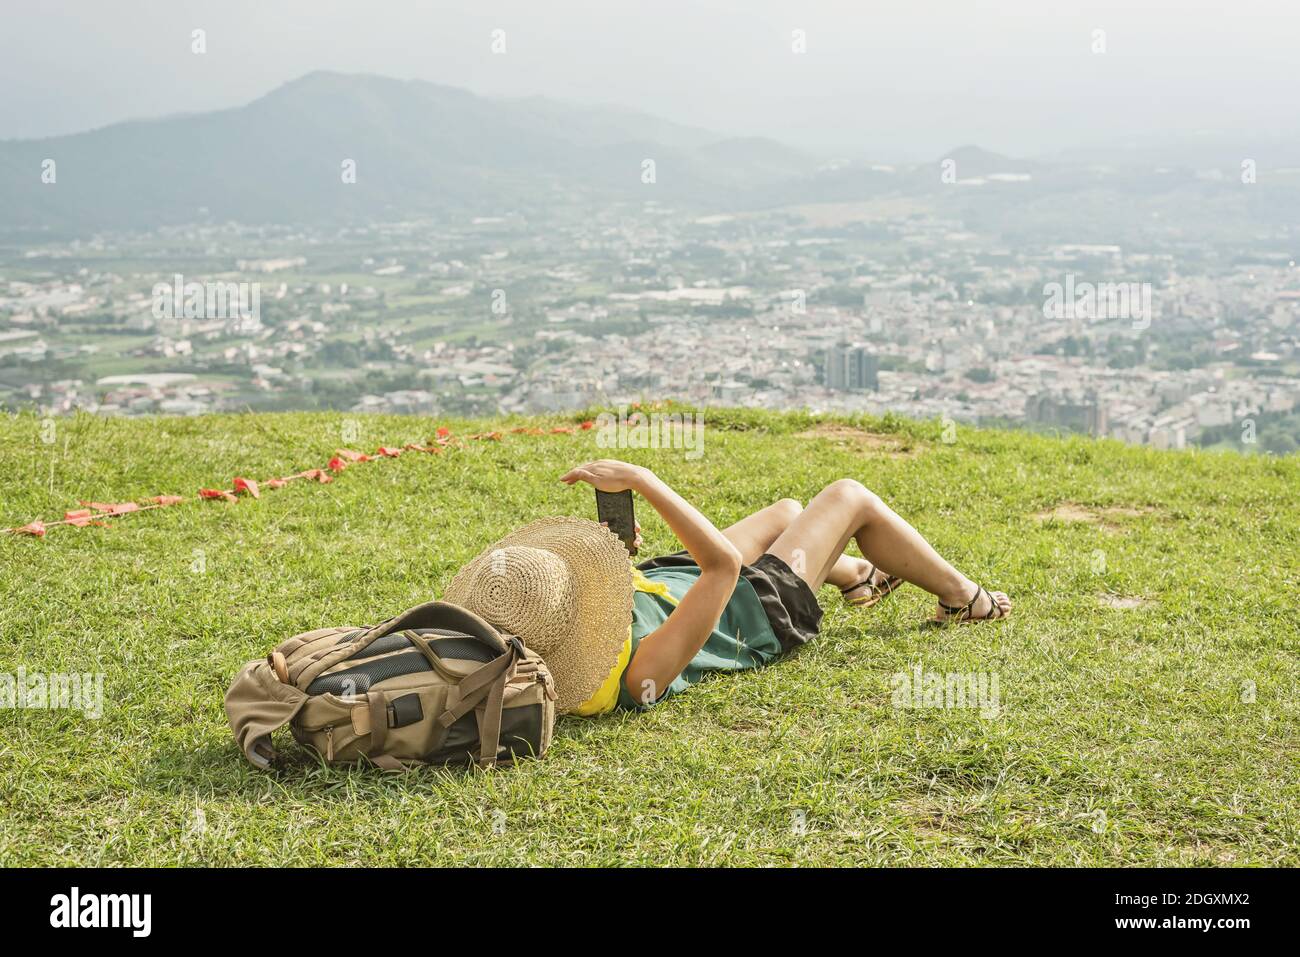 Woman lie on grassland and using cellphone Stock Photo